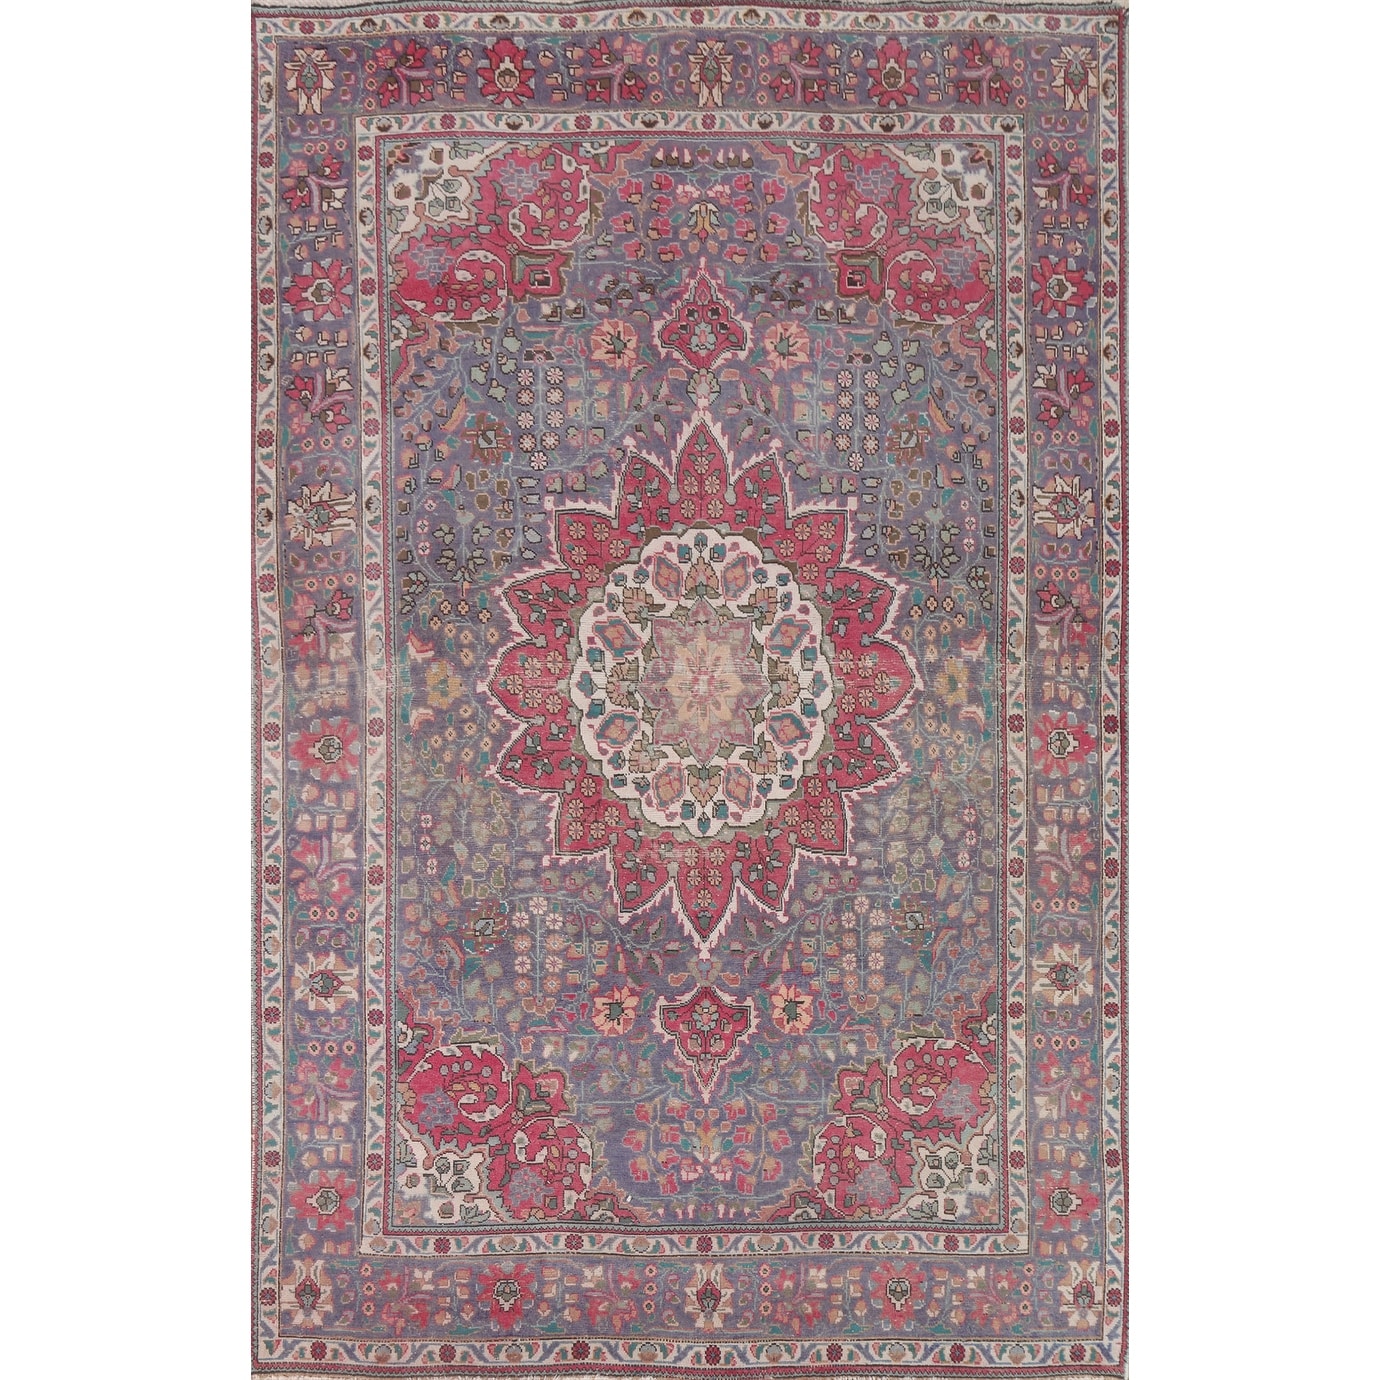 https://ak1.ostkcdn.com/images/products/is/images/direct/82114b56214a88e550ad5105ca9f915cdc1425f6/Blue-Tabriz-Persian-Vintage-Area-Rug-Hand-knotted-Wool-Carpet.jpg